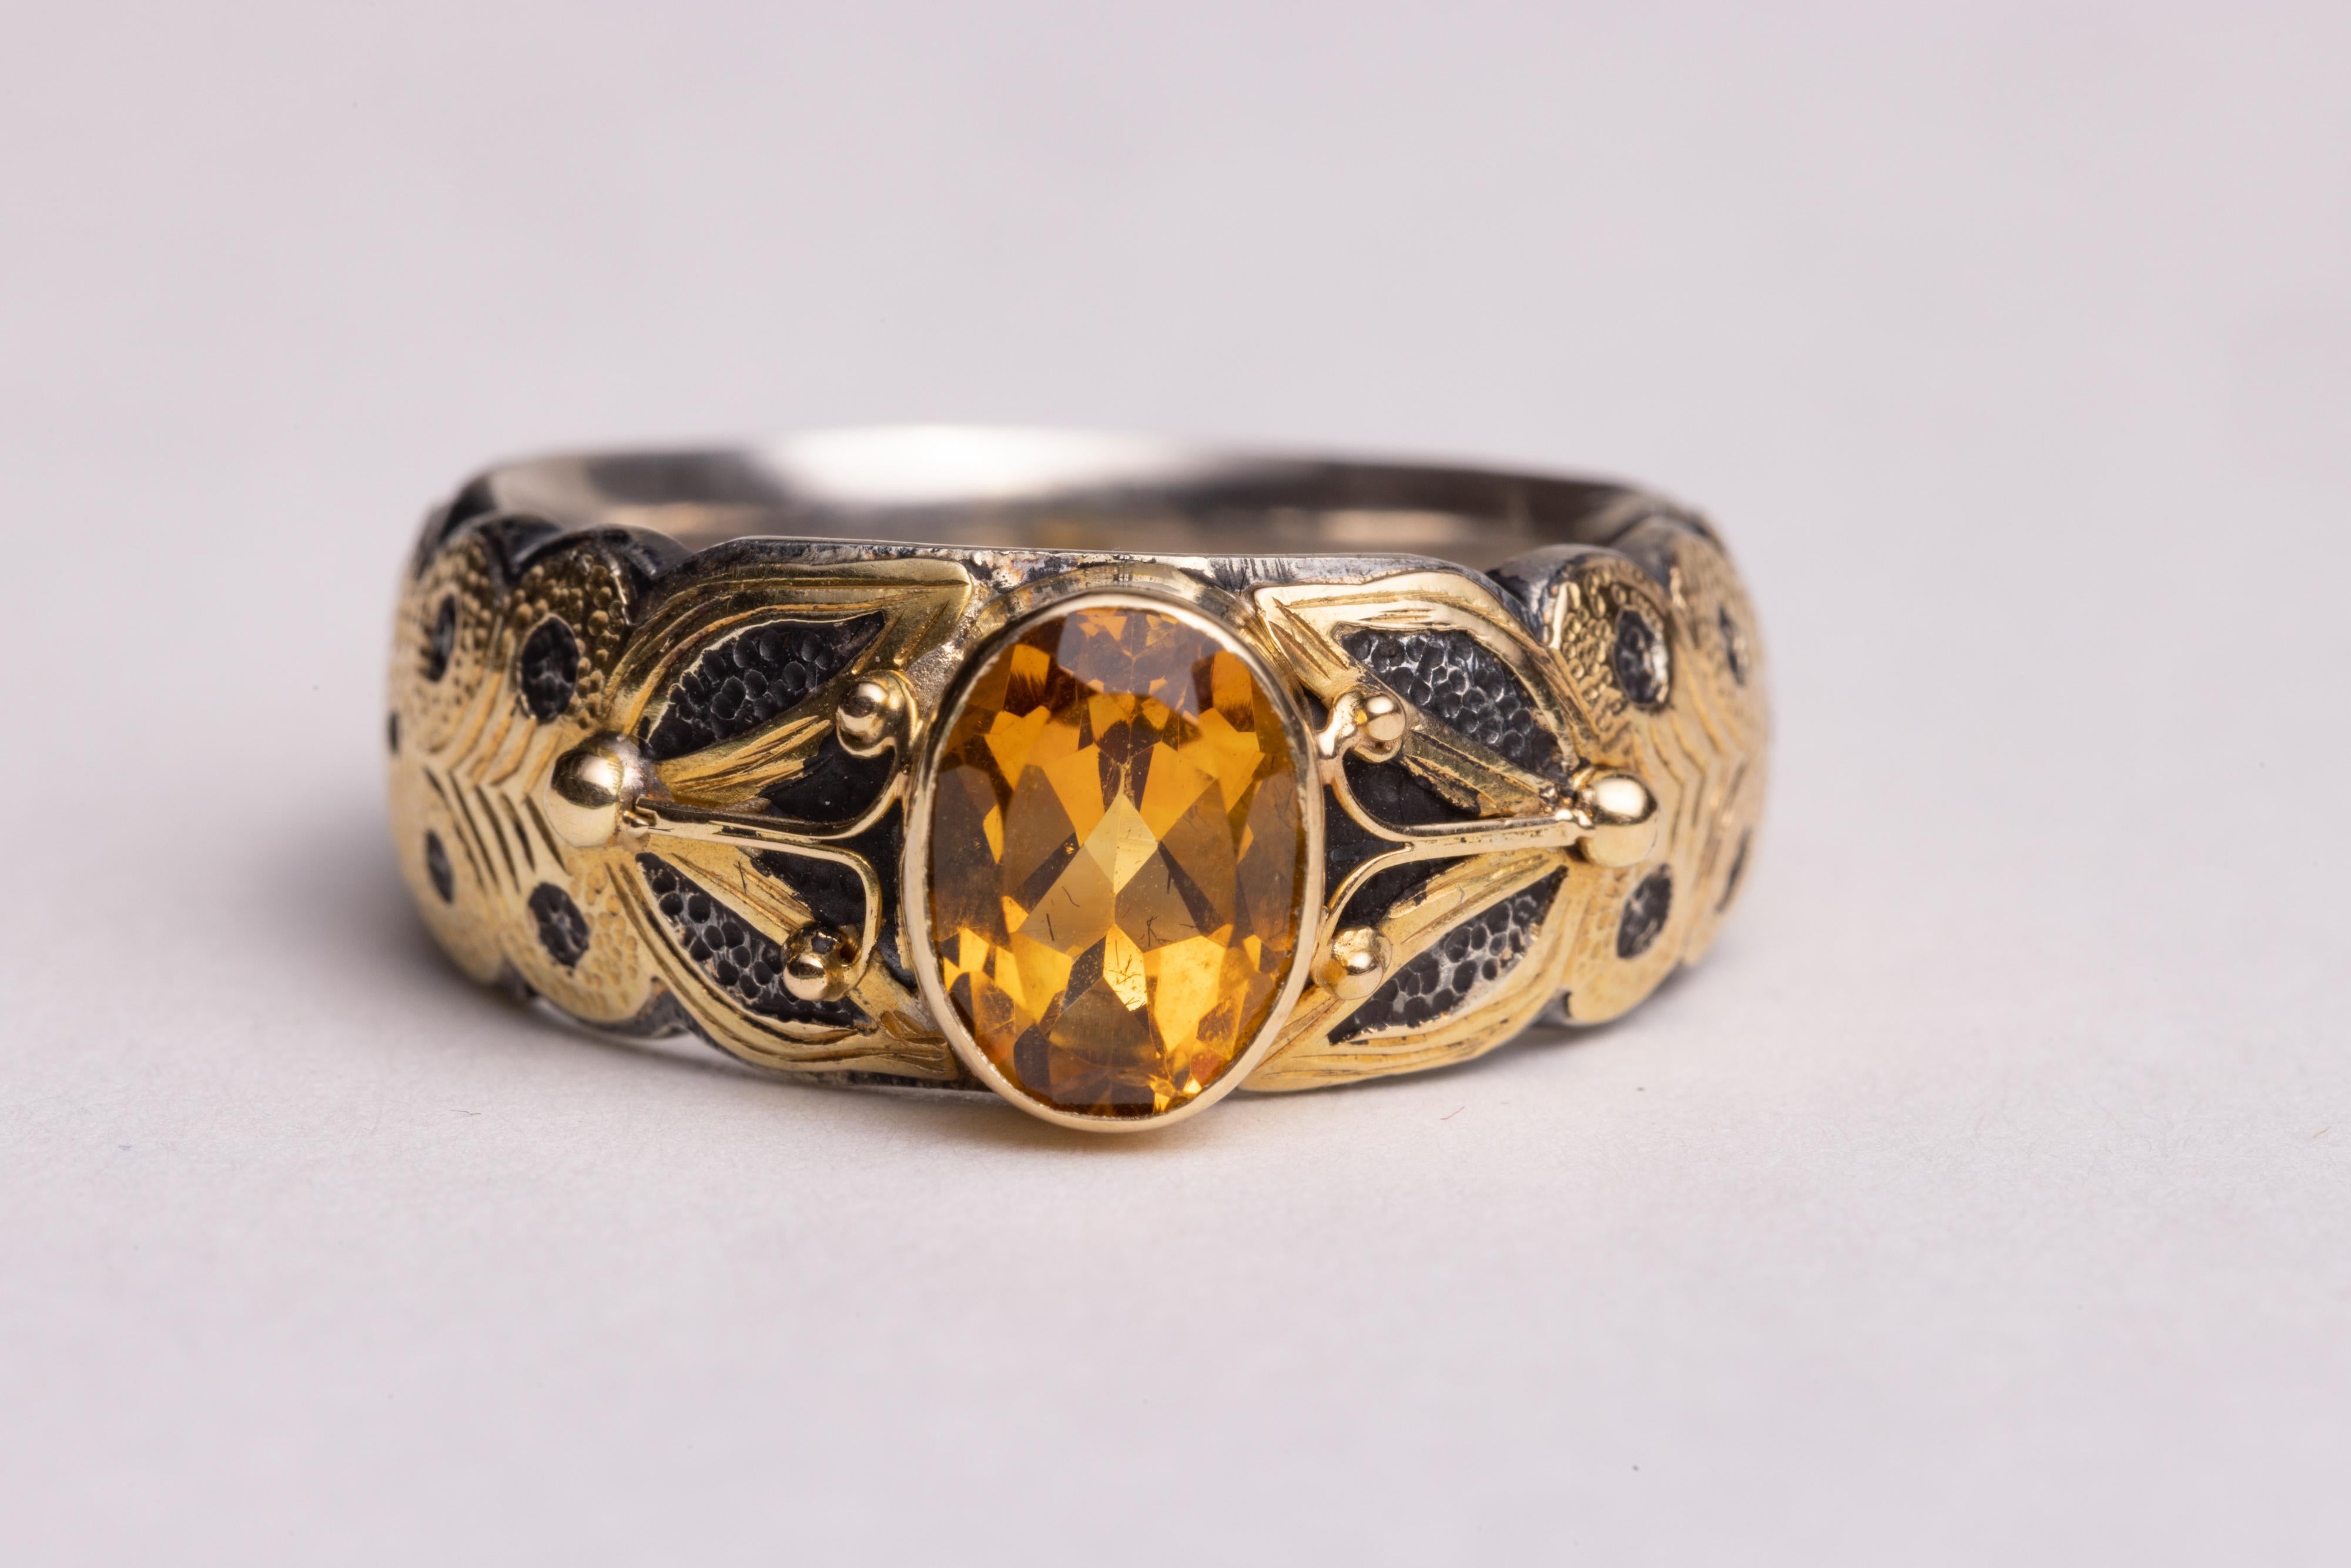 A stunning faceted, oval yellow sapphire ring with sterling silver with a hand-tooled 18K gold overlay.  Ring size is 7.25.  Probably easier to size down than up, but not impossible.